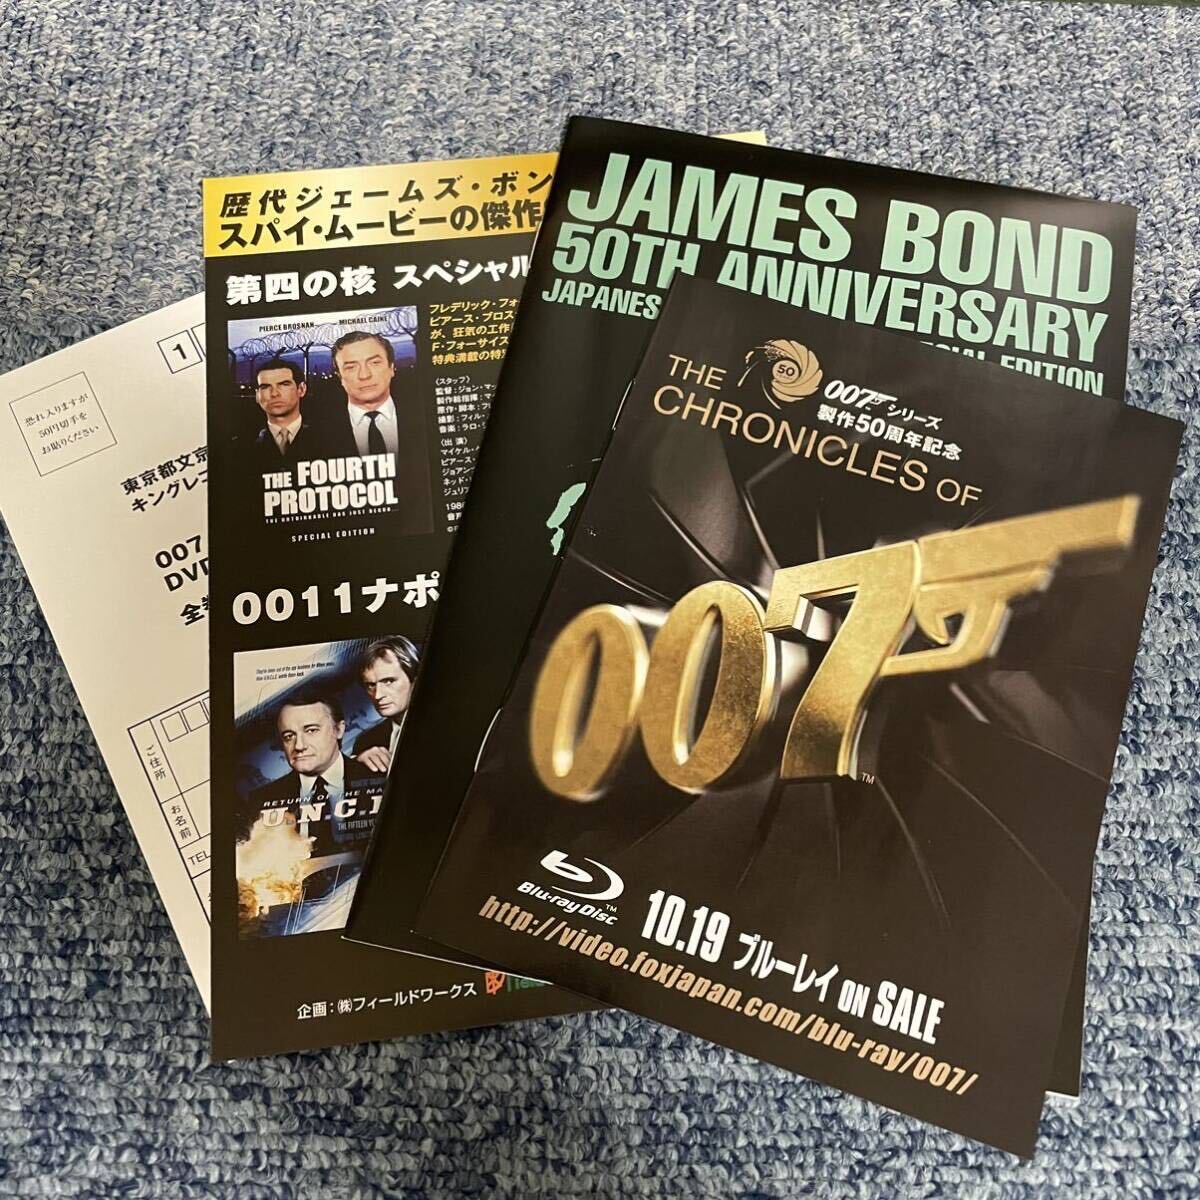 007 TV broadcast blow change the first compilation special version DVD-BOX no. four period ( the first times complete production limitation )